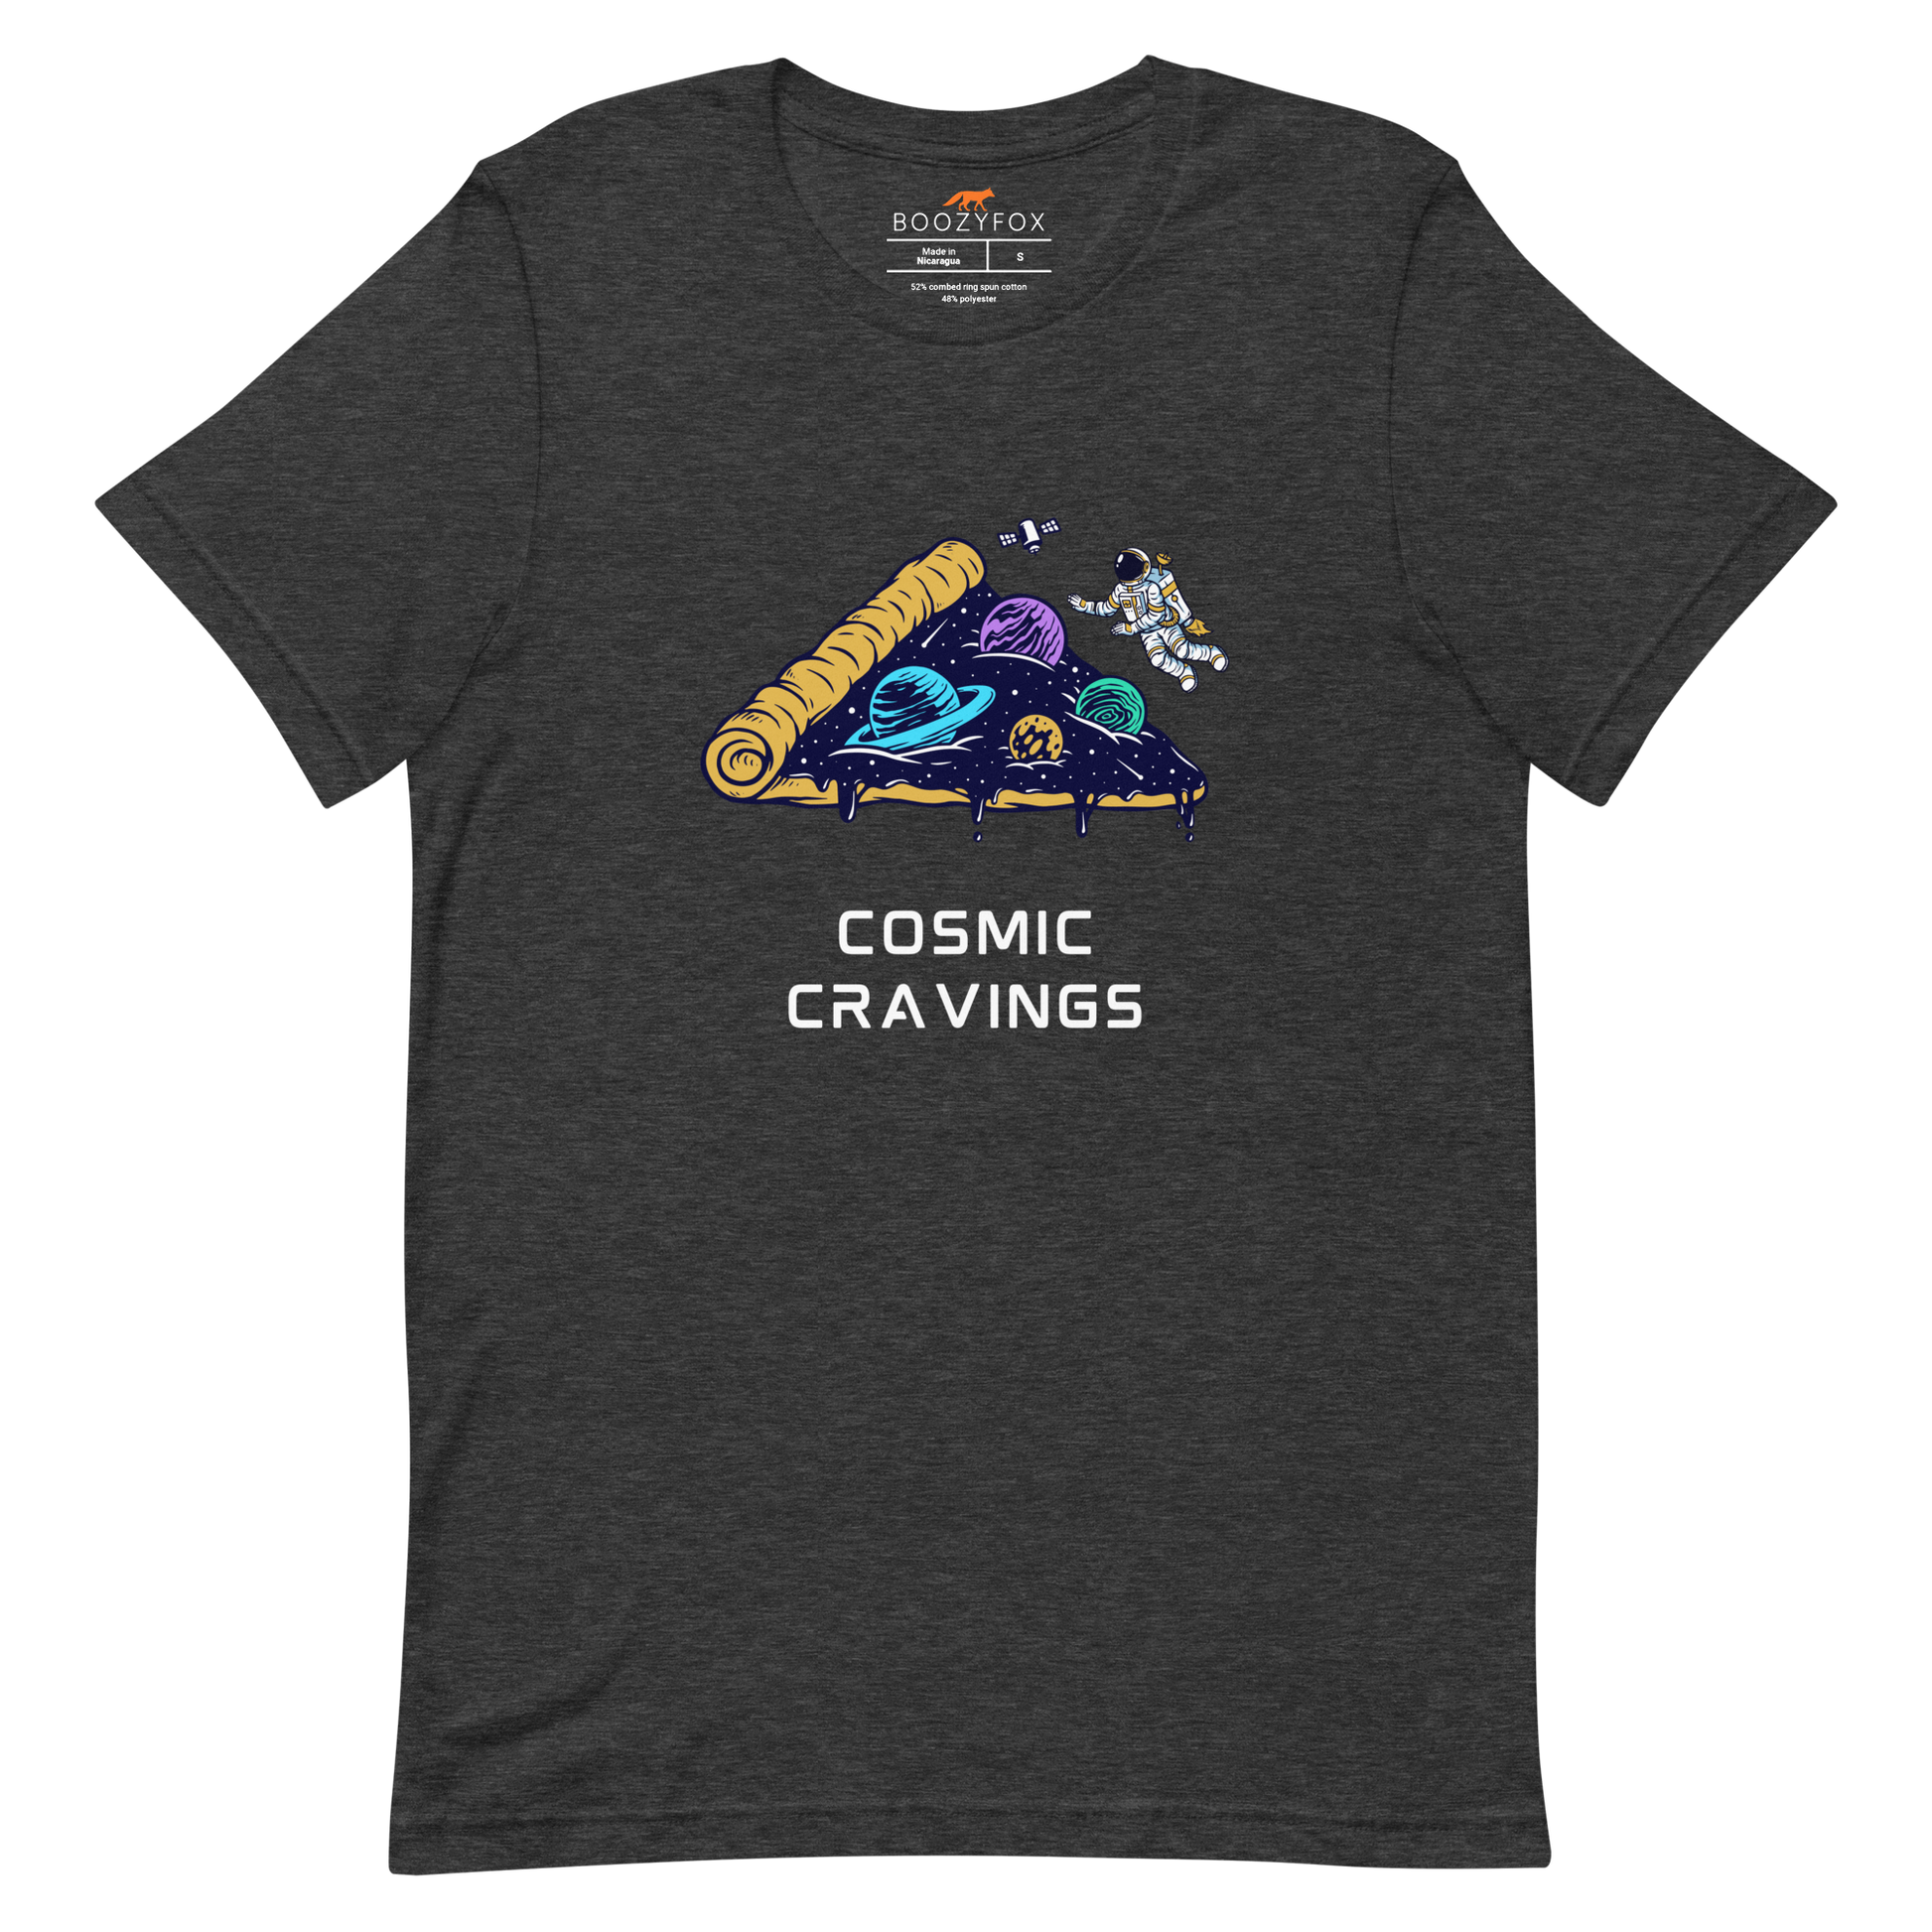 Dark Grey Heather Premium Cosmic Cravings Tee featuring an Astronaut Exploring a Pizza Universe graphic on the chest - Funny Graphic Space Tees - Boozy Fox